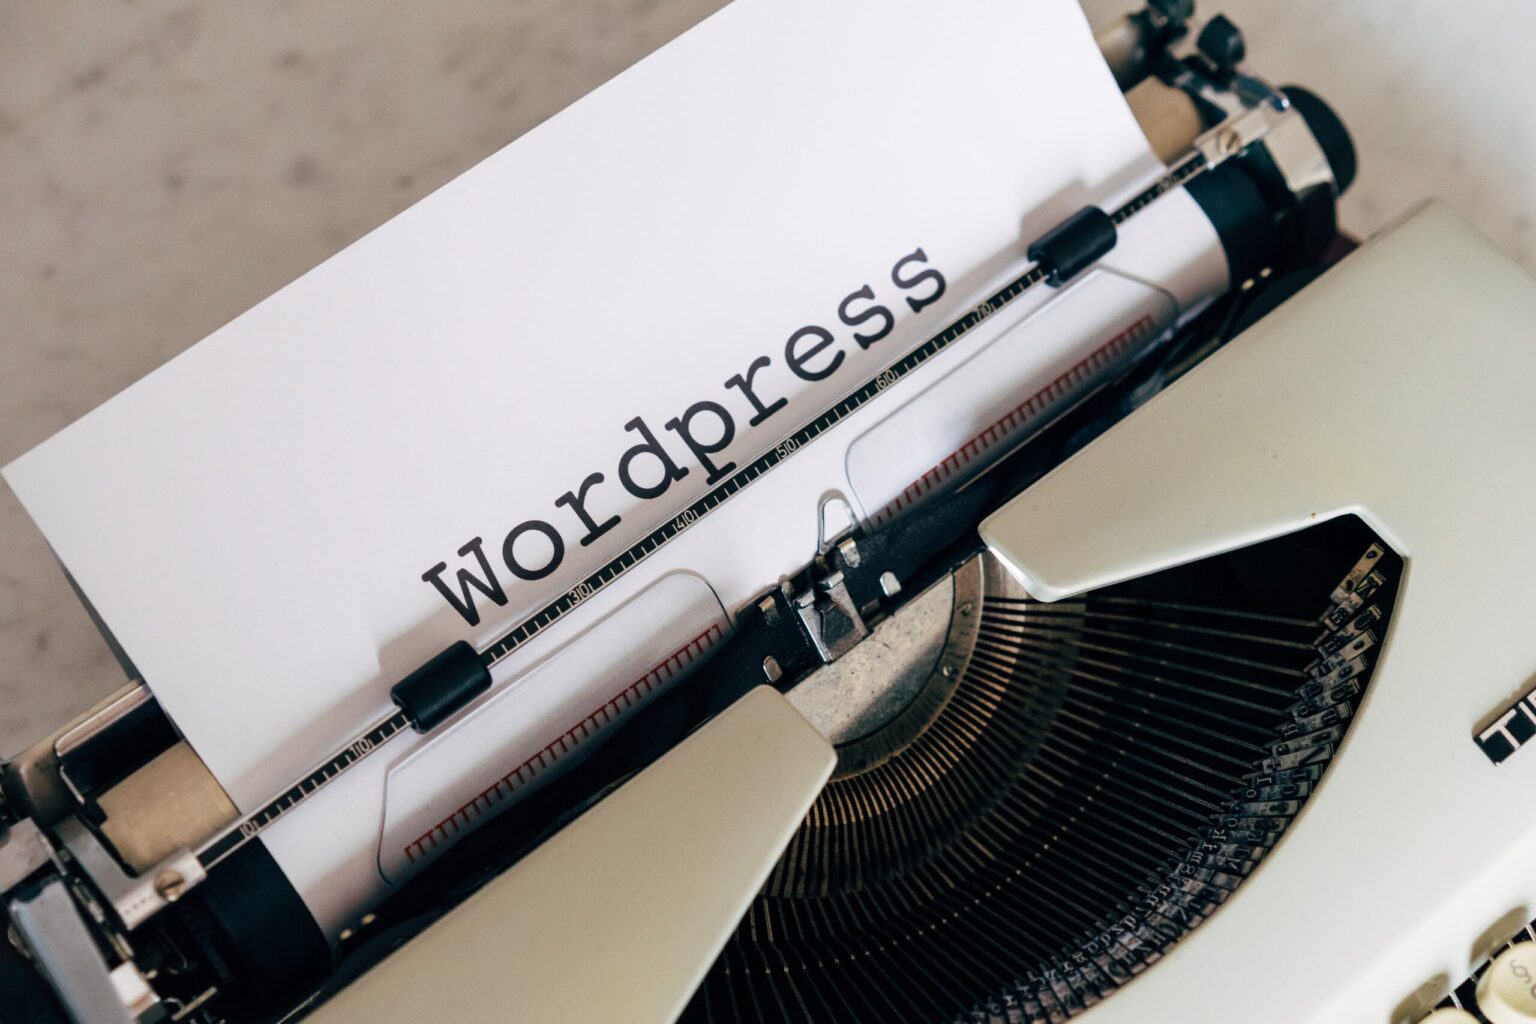 WordPress.com vs WordPress.org – Differences and Which One You Should Use